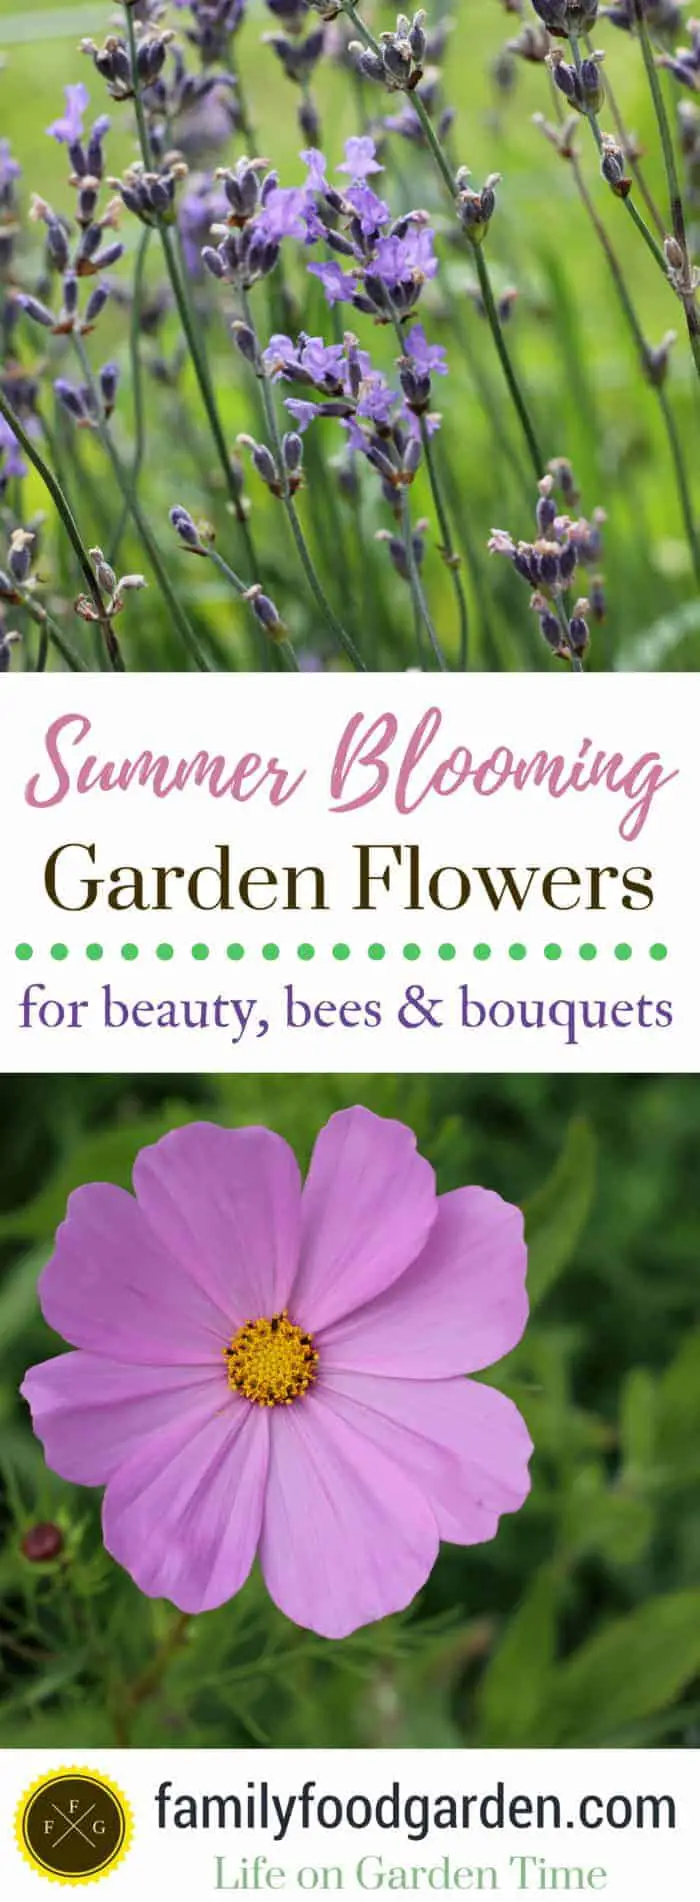 Easy to grow long blooming summer garden flowers